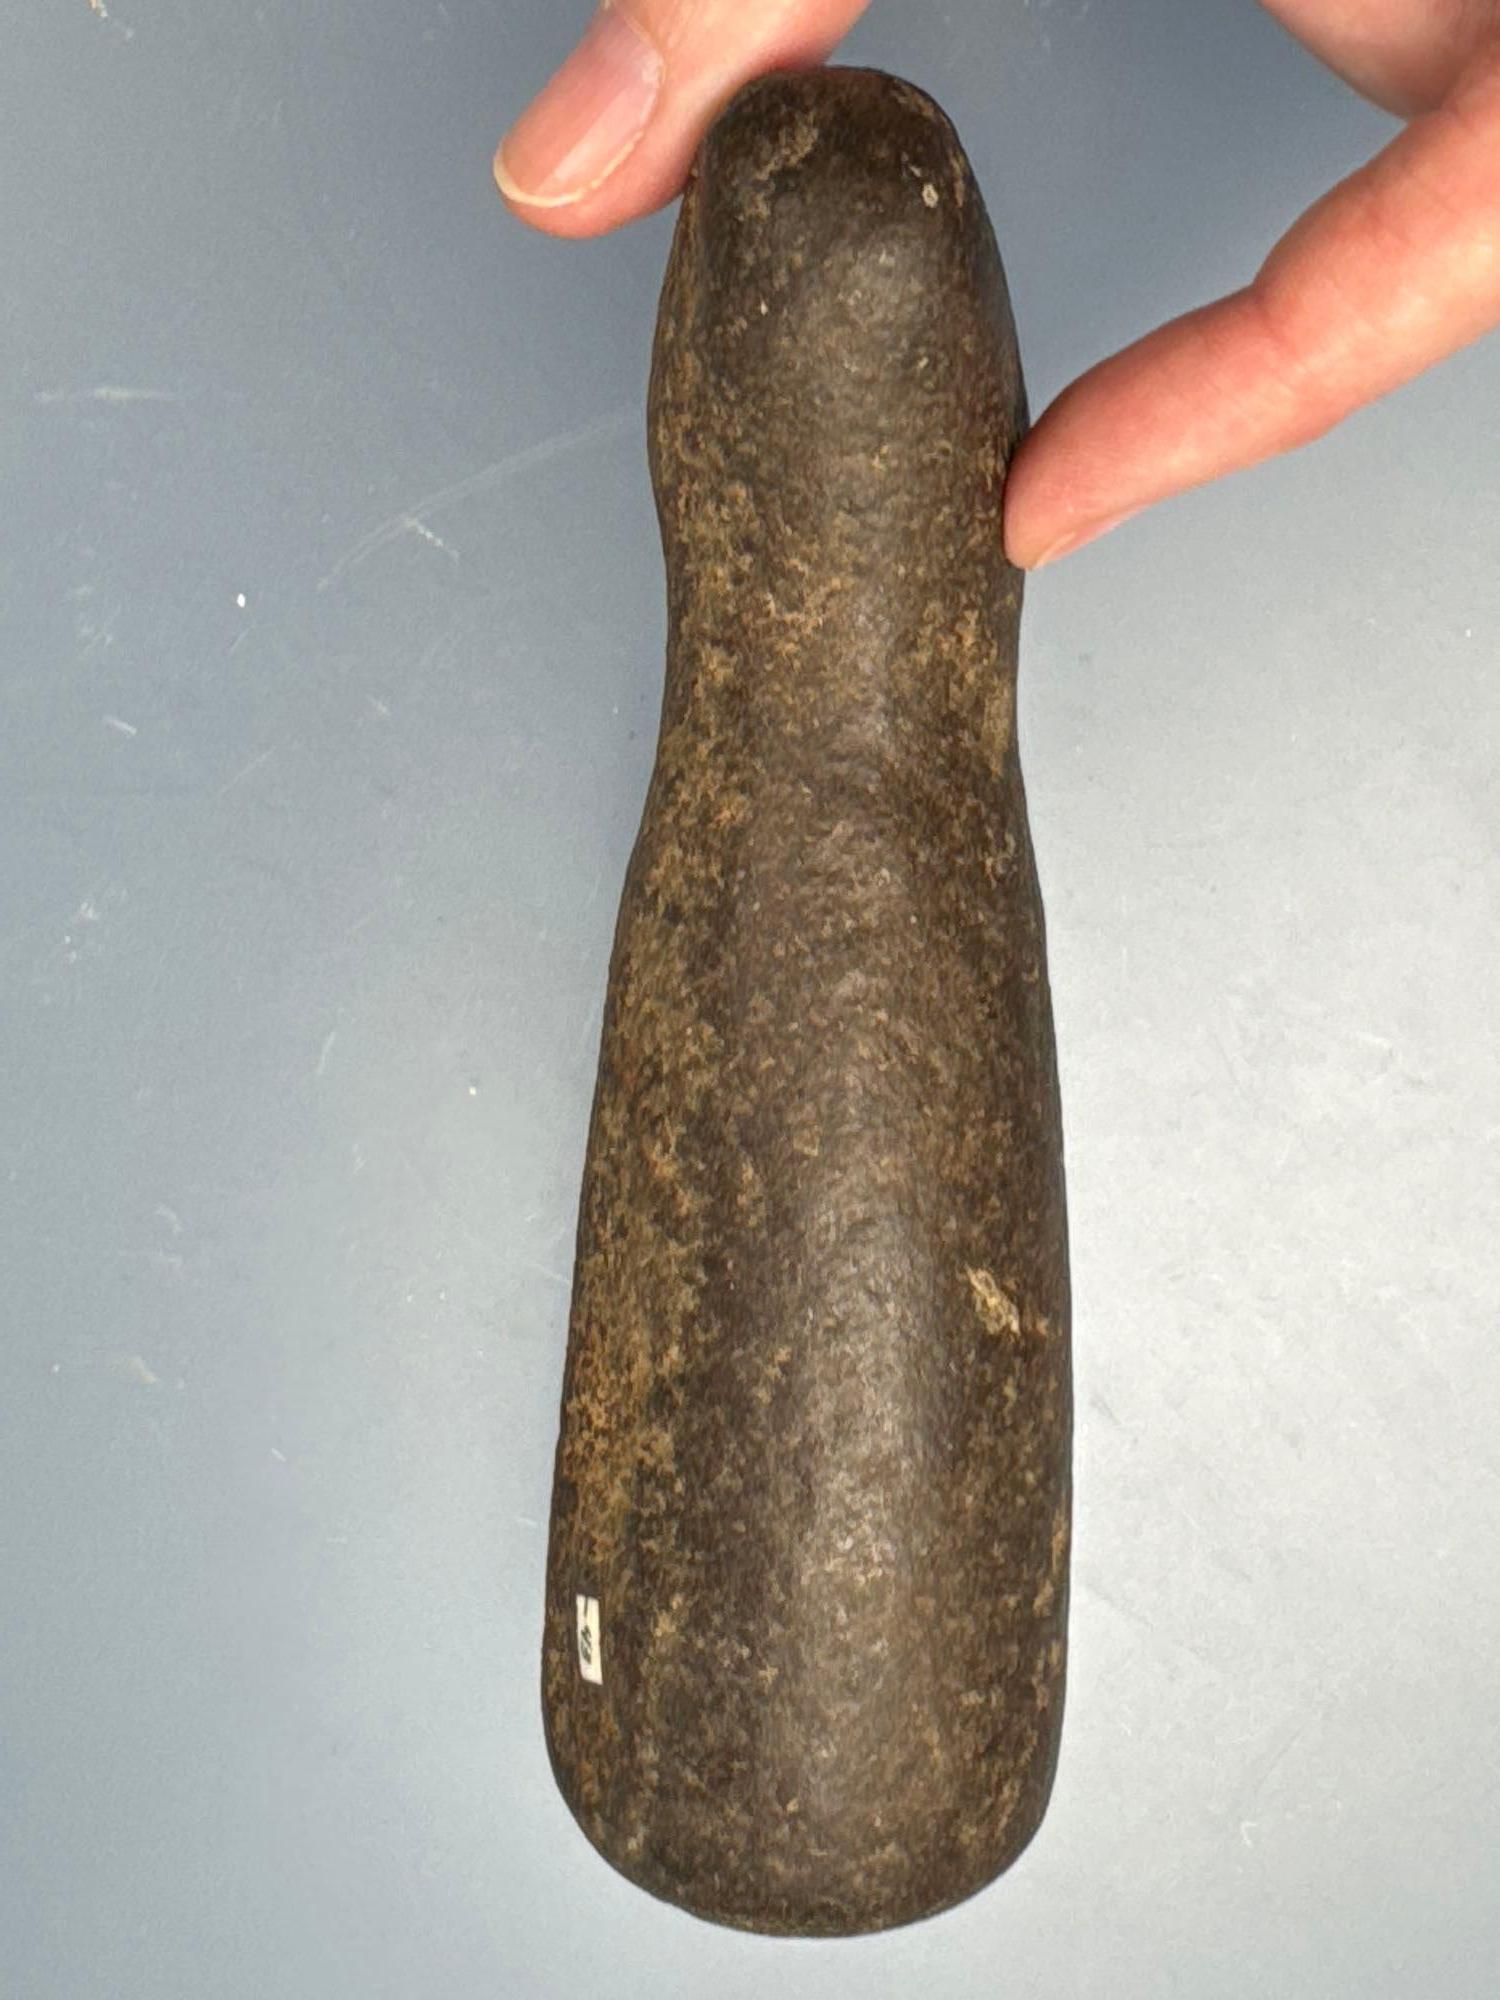 Exceedingly Rare Bear Effigy Pestle, Found in New York, Ex: Raysender Collection, Well-Made, Measure